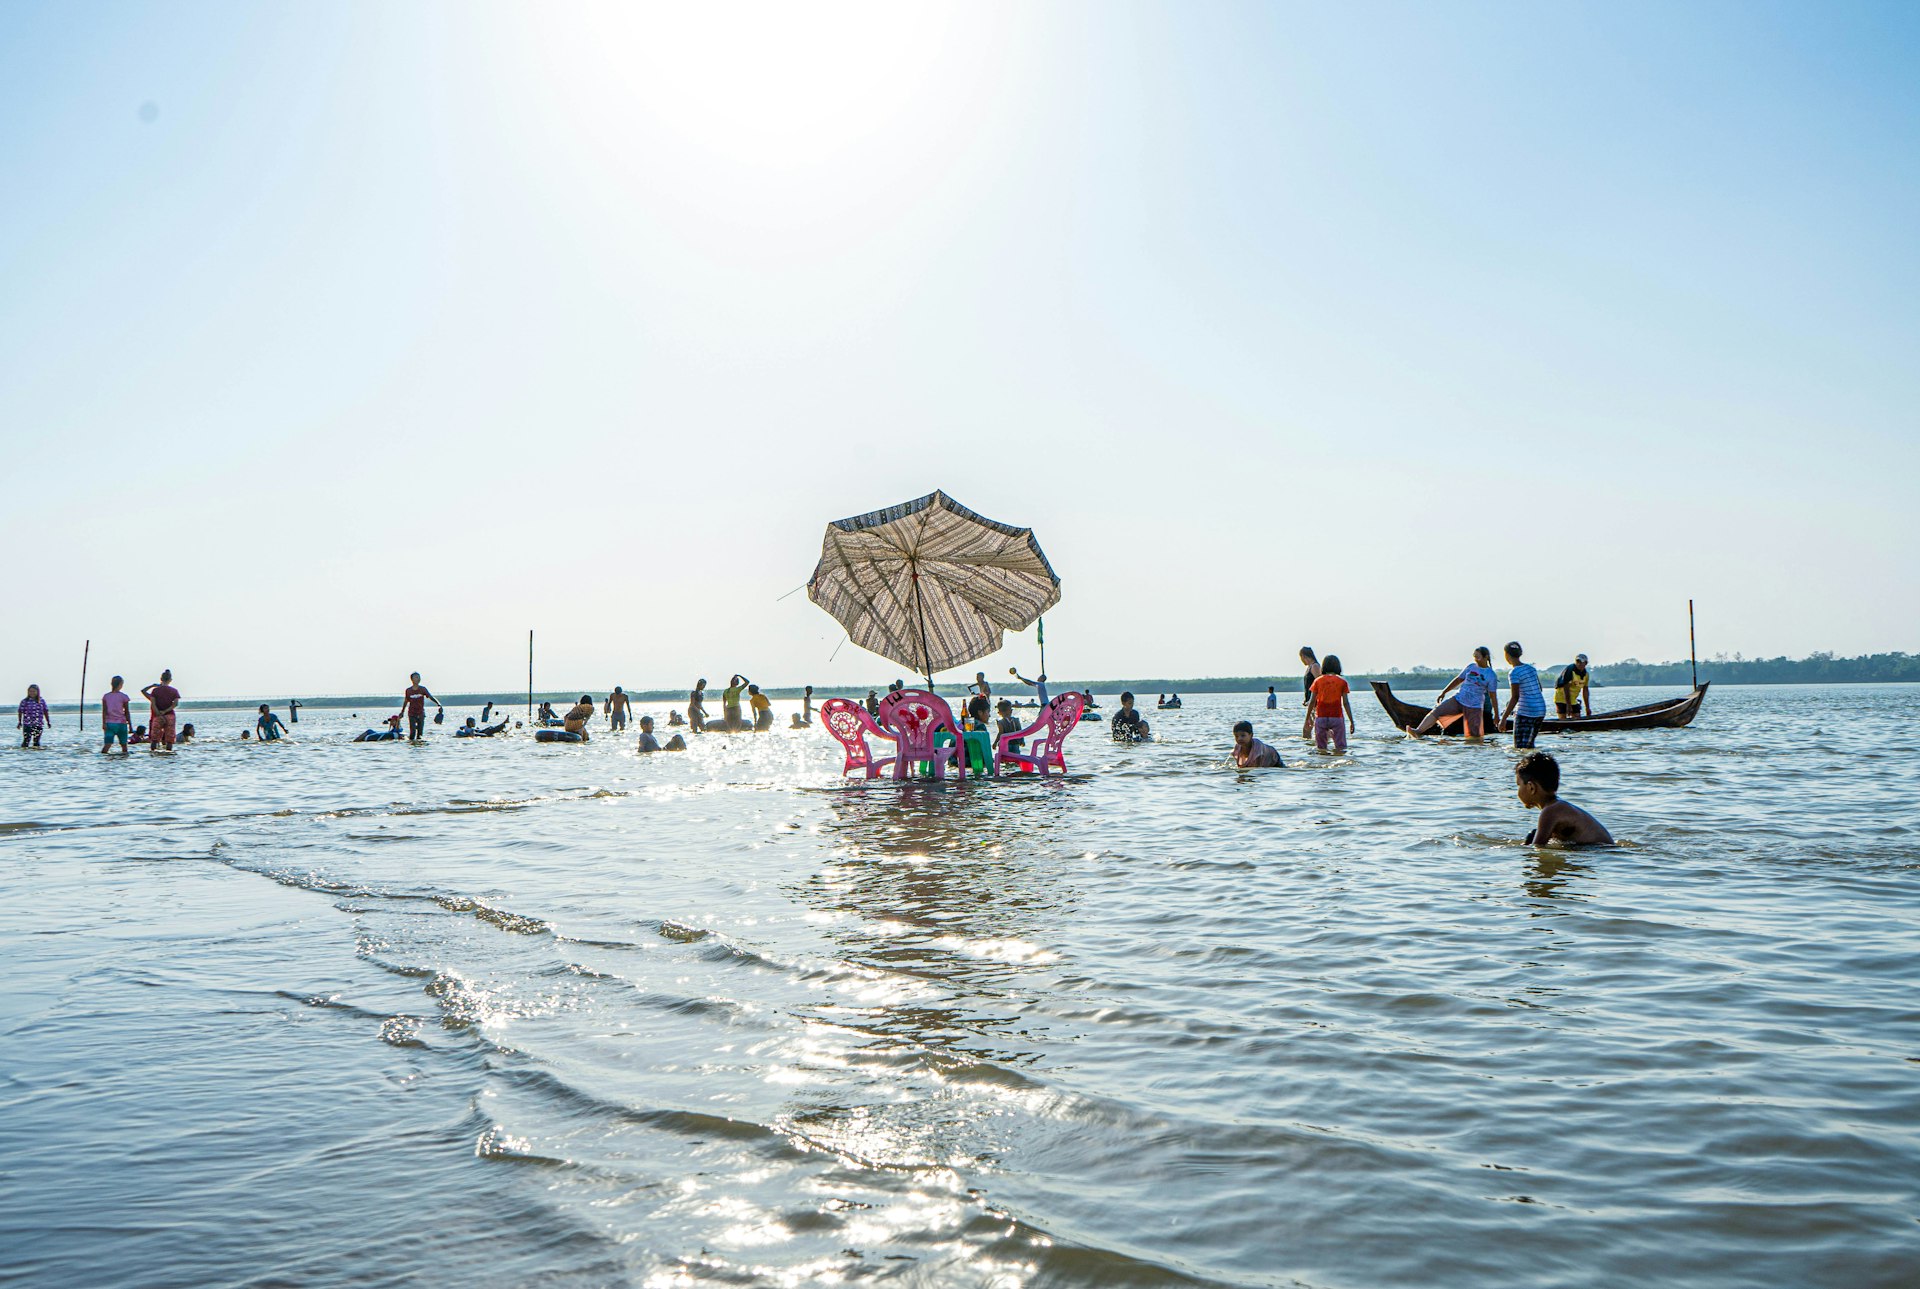 A table and three chairs are slowly submerged by the tide as it laps the beach in Myanmar. Many people are paddling in the shallow waters.